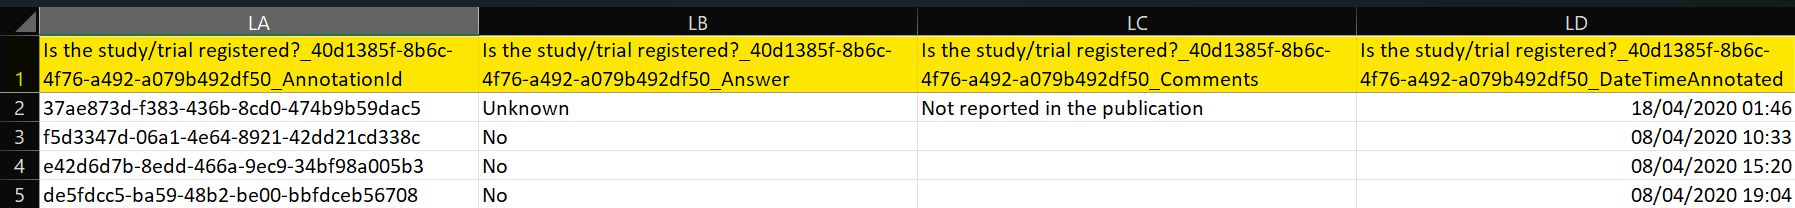 Single header row with question ID